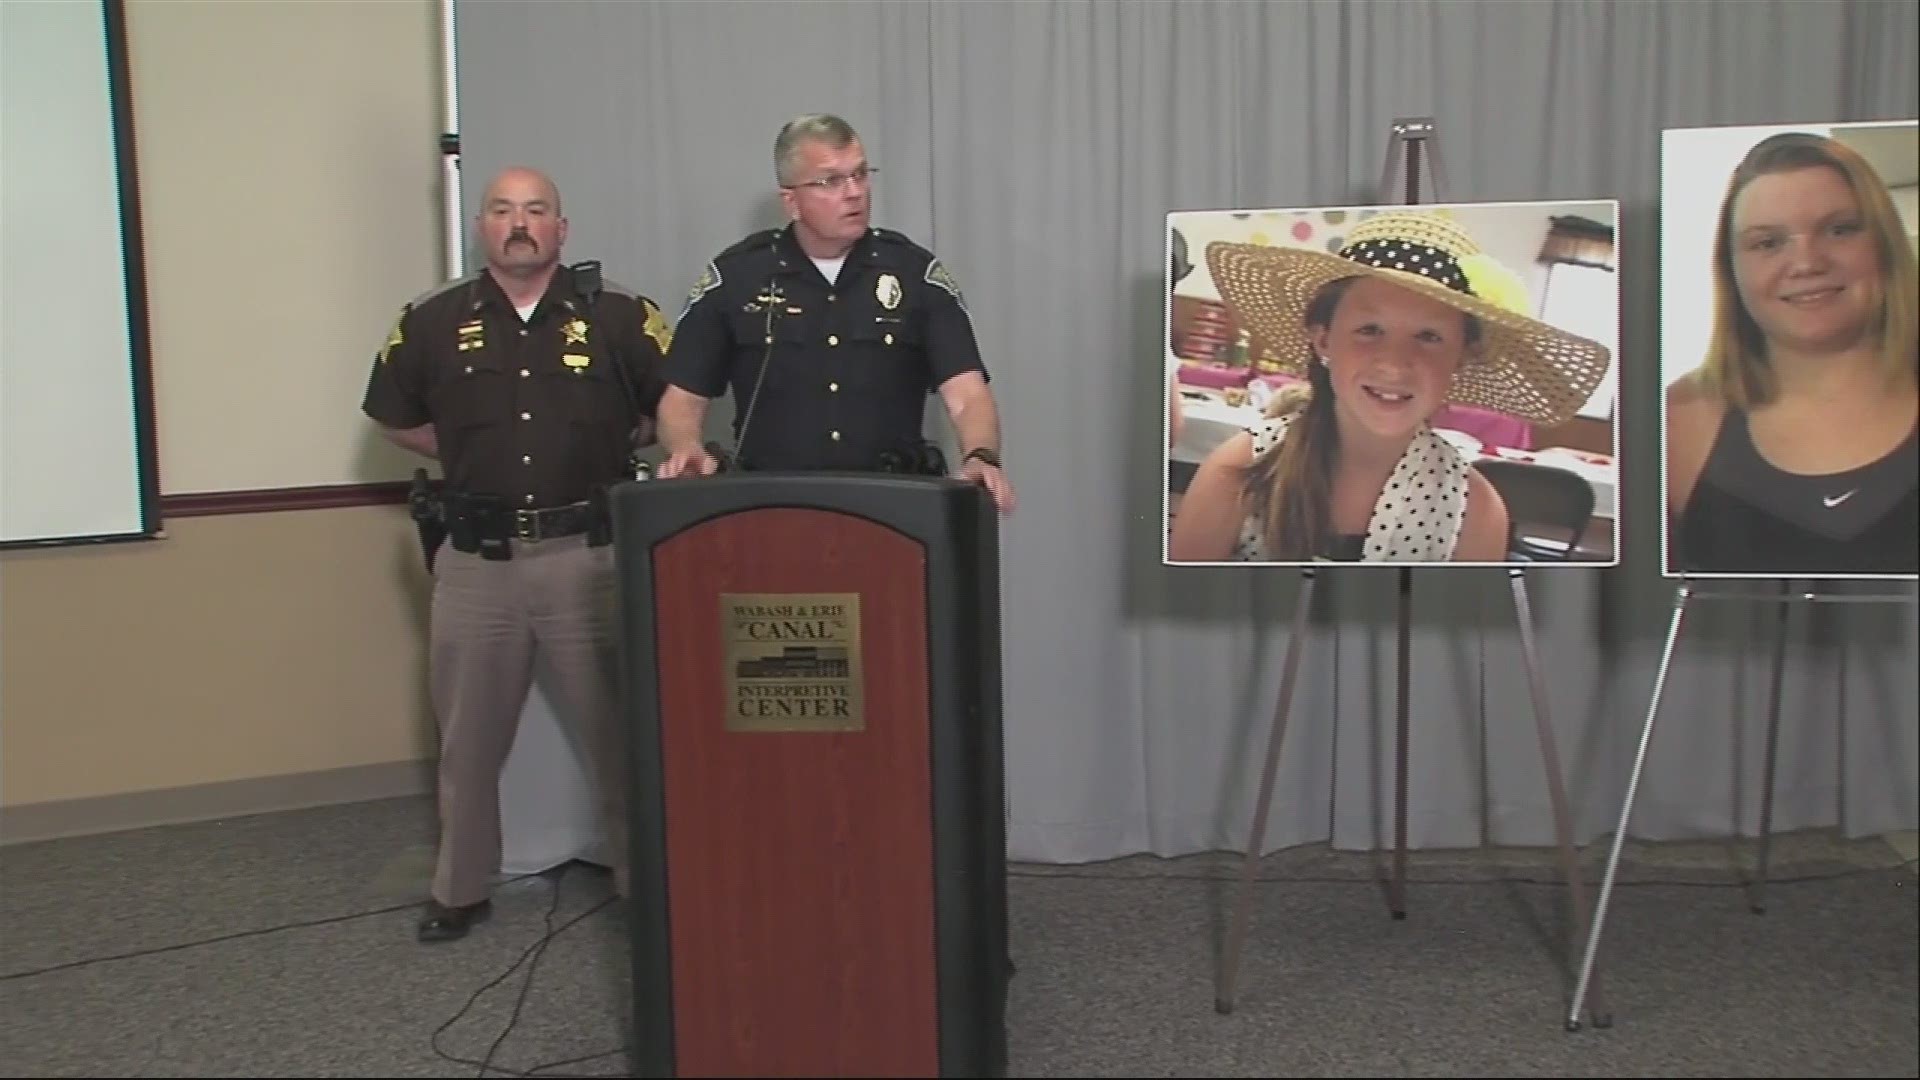 State Police on Monday also released a new sketch and audio of the man suspected of killing 14-year-old Liberty German and 13-year-old Abigail Williams. (AP)